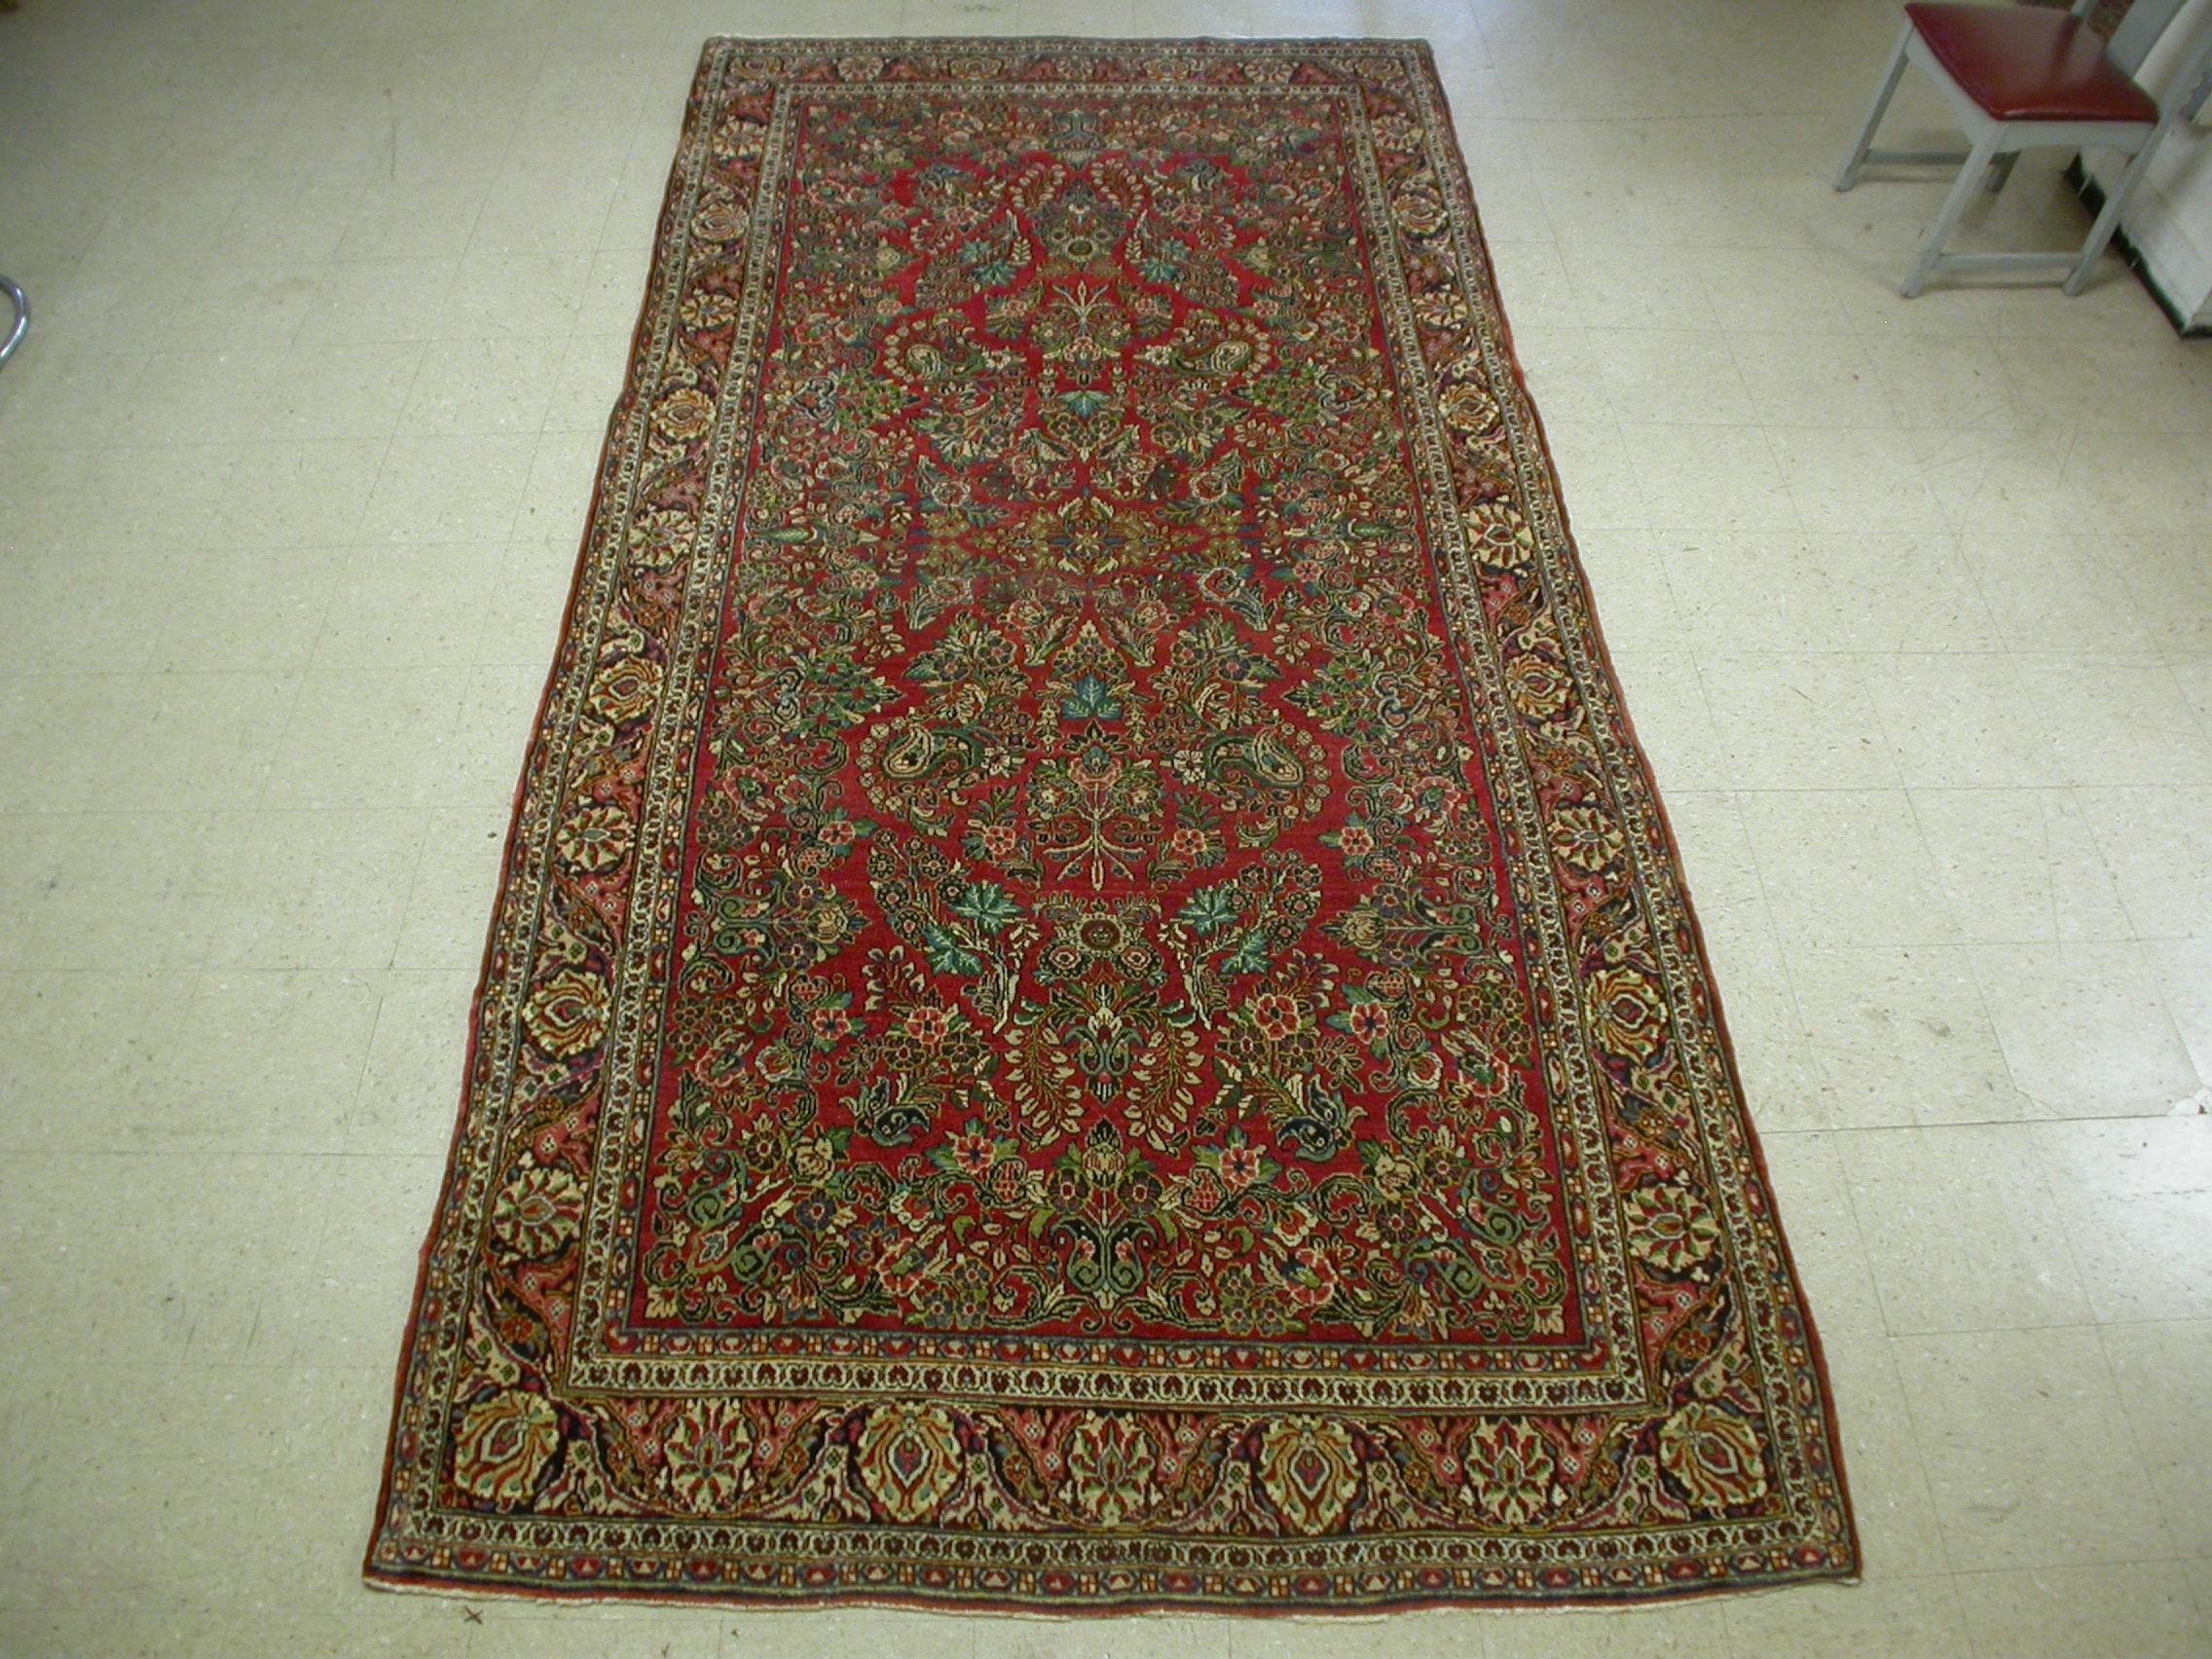 Sarouk is a small village and its neighboring villages in Northwestern Iran. Most Sarouk carpets follow a very distinctive design and is depended on floral sprays and bouquets. They have a full pile and are the most durable of Persian rugs.

This